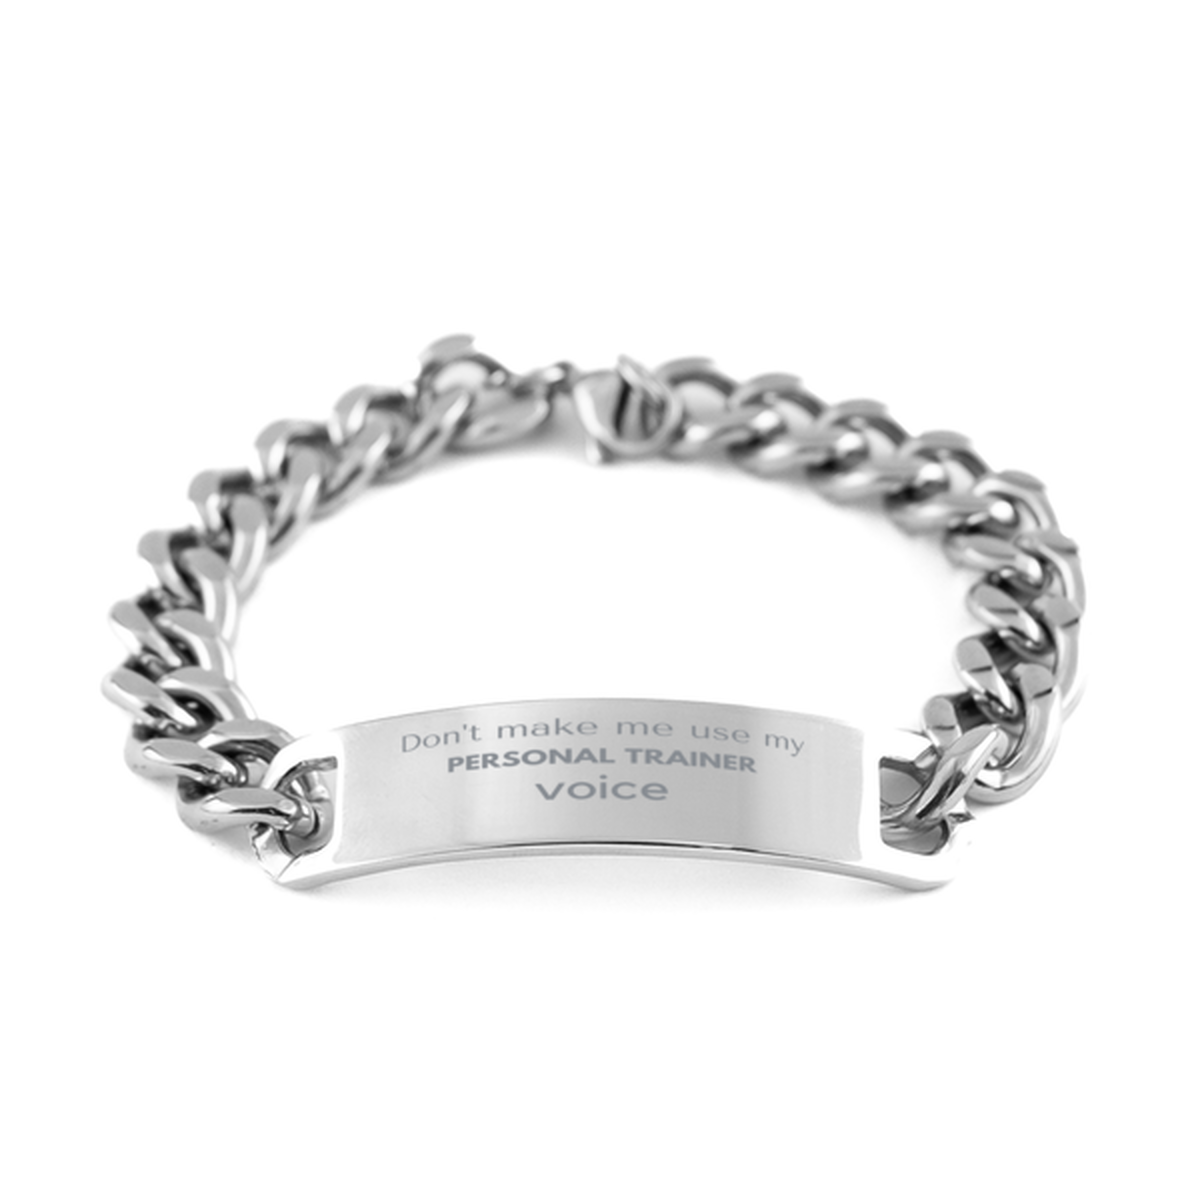 Don't make me use my Personal Trainer voice, Sarcasm Personal Trainer Gifts, Christmas Personal Trainer Cuban Chain Stainless Steel Bracelet Birthday Unique Gifts For Personal Trainer Coworkers, Men, Women, Colleague, Friends